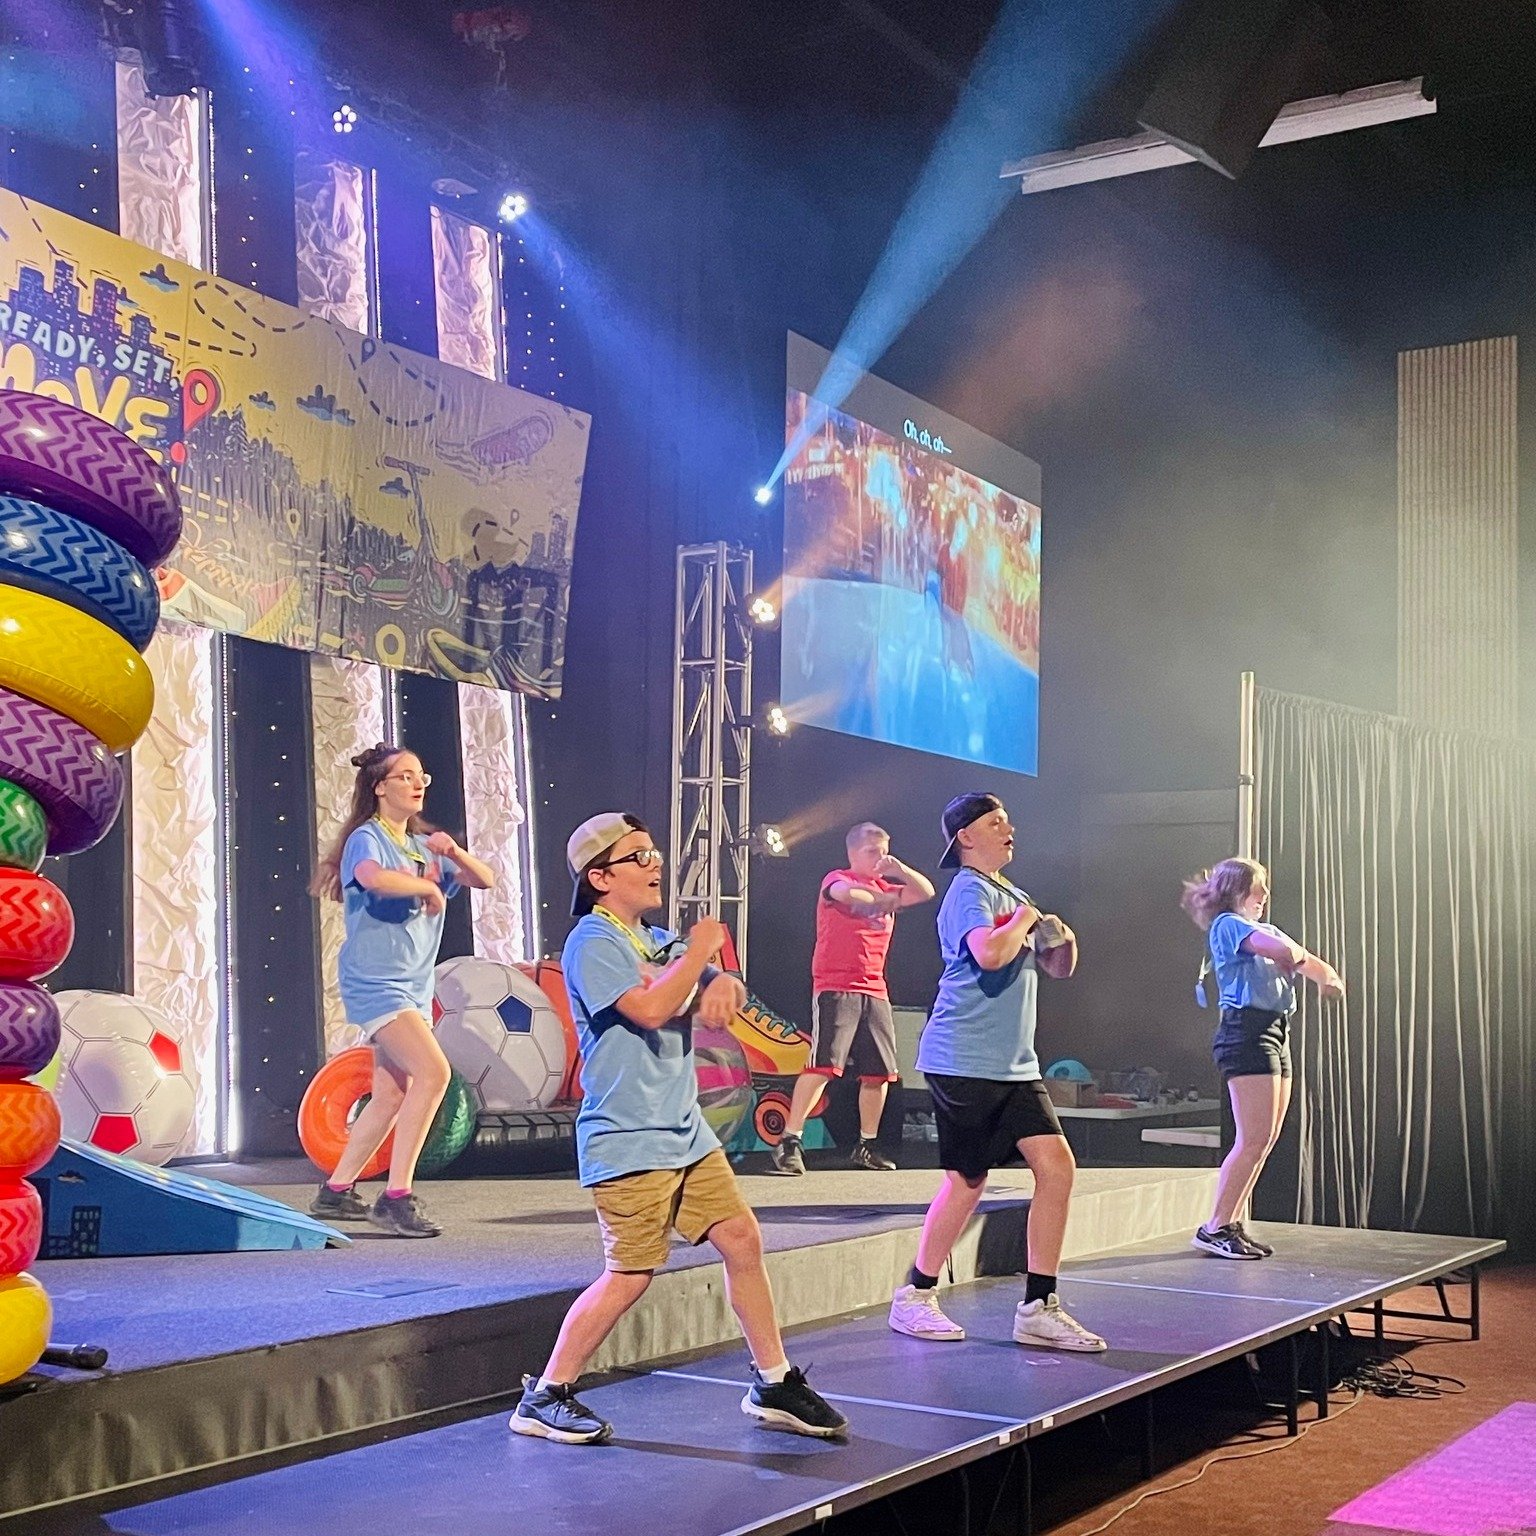 🎉 Looking for a party? Vacation Bible Camp is sure to be one, and we need your help to make that happen!

We are looking for 15-20 more volunteers June 23rd-27th from 5-7pm. You can sign up at the table in the foyer or fill out a form on the website